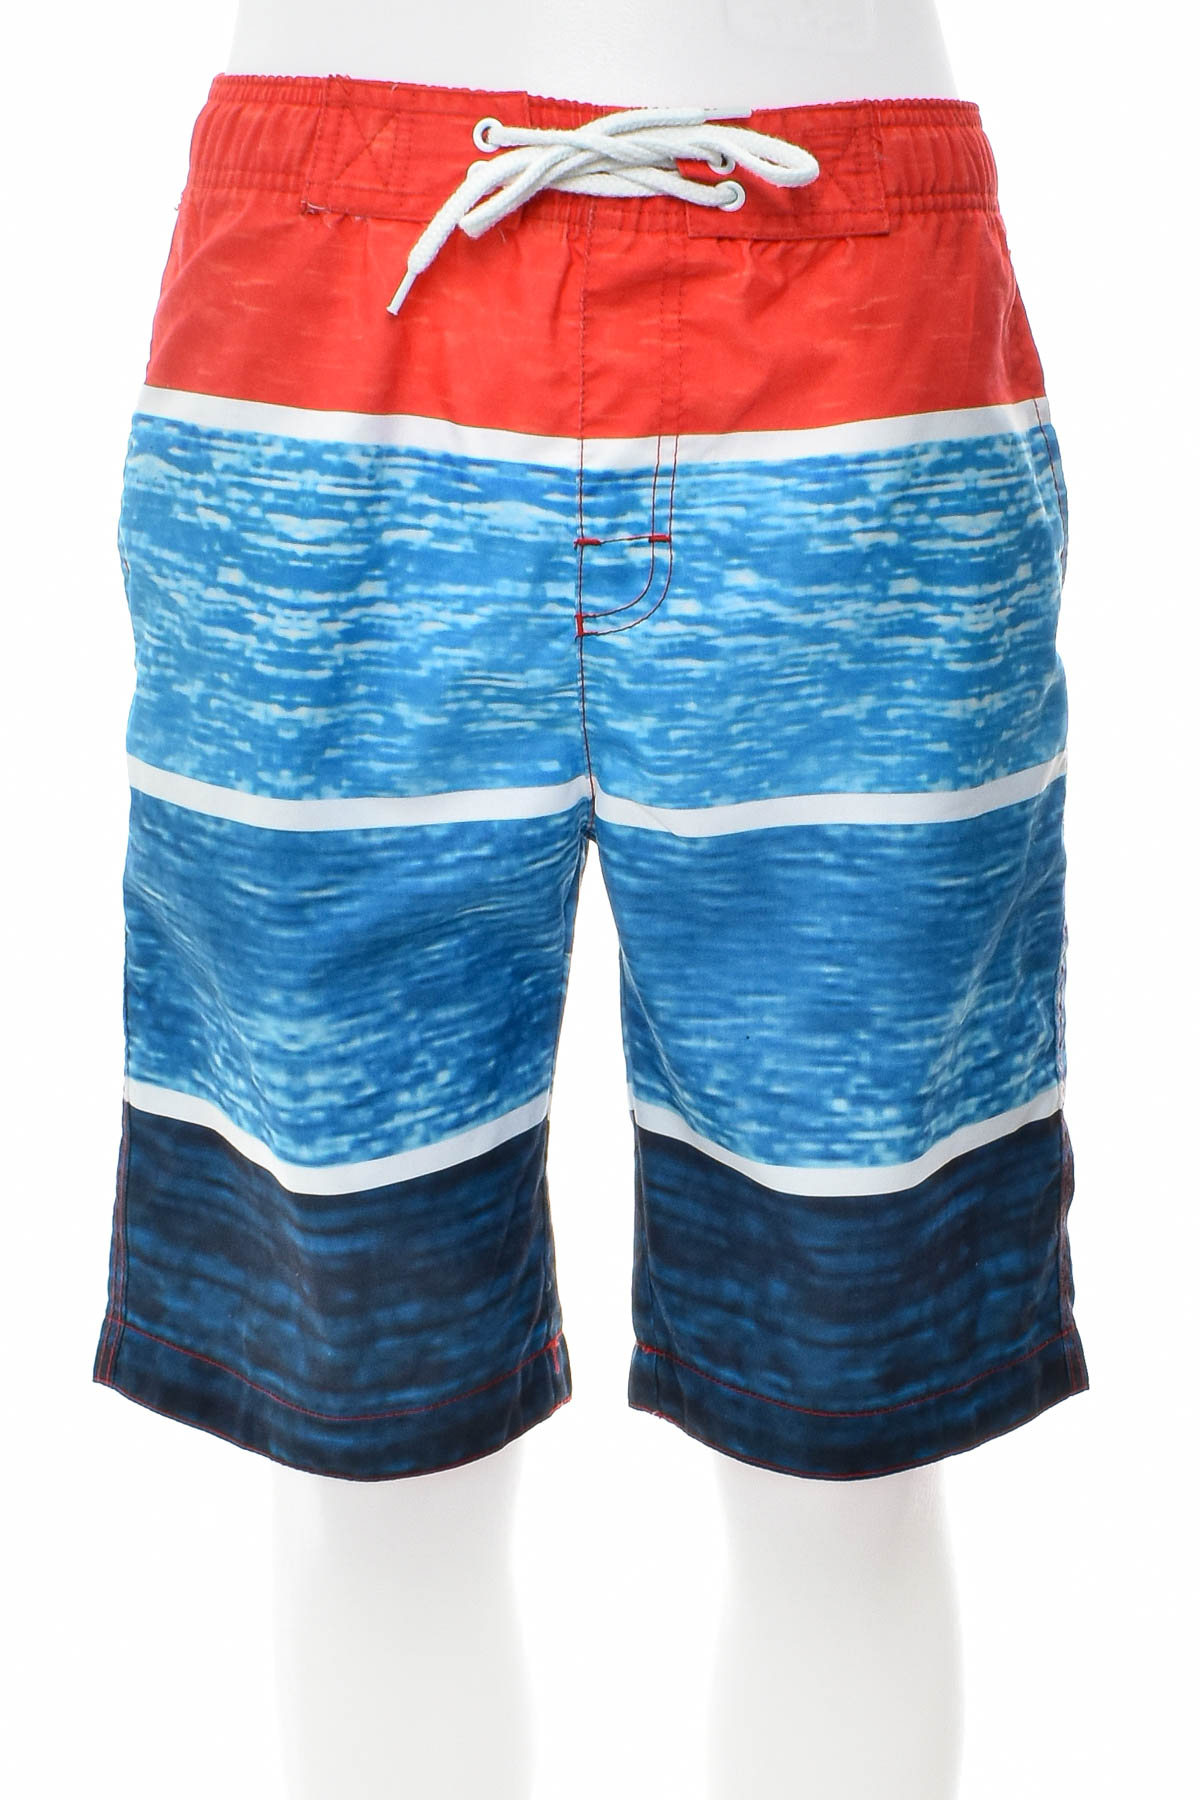 Men's shorts - GWELL - 0